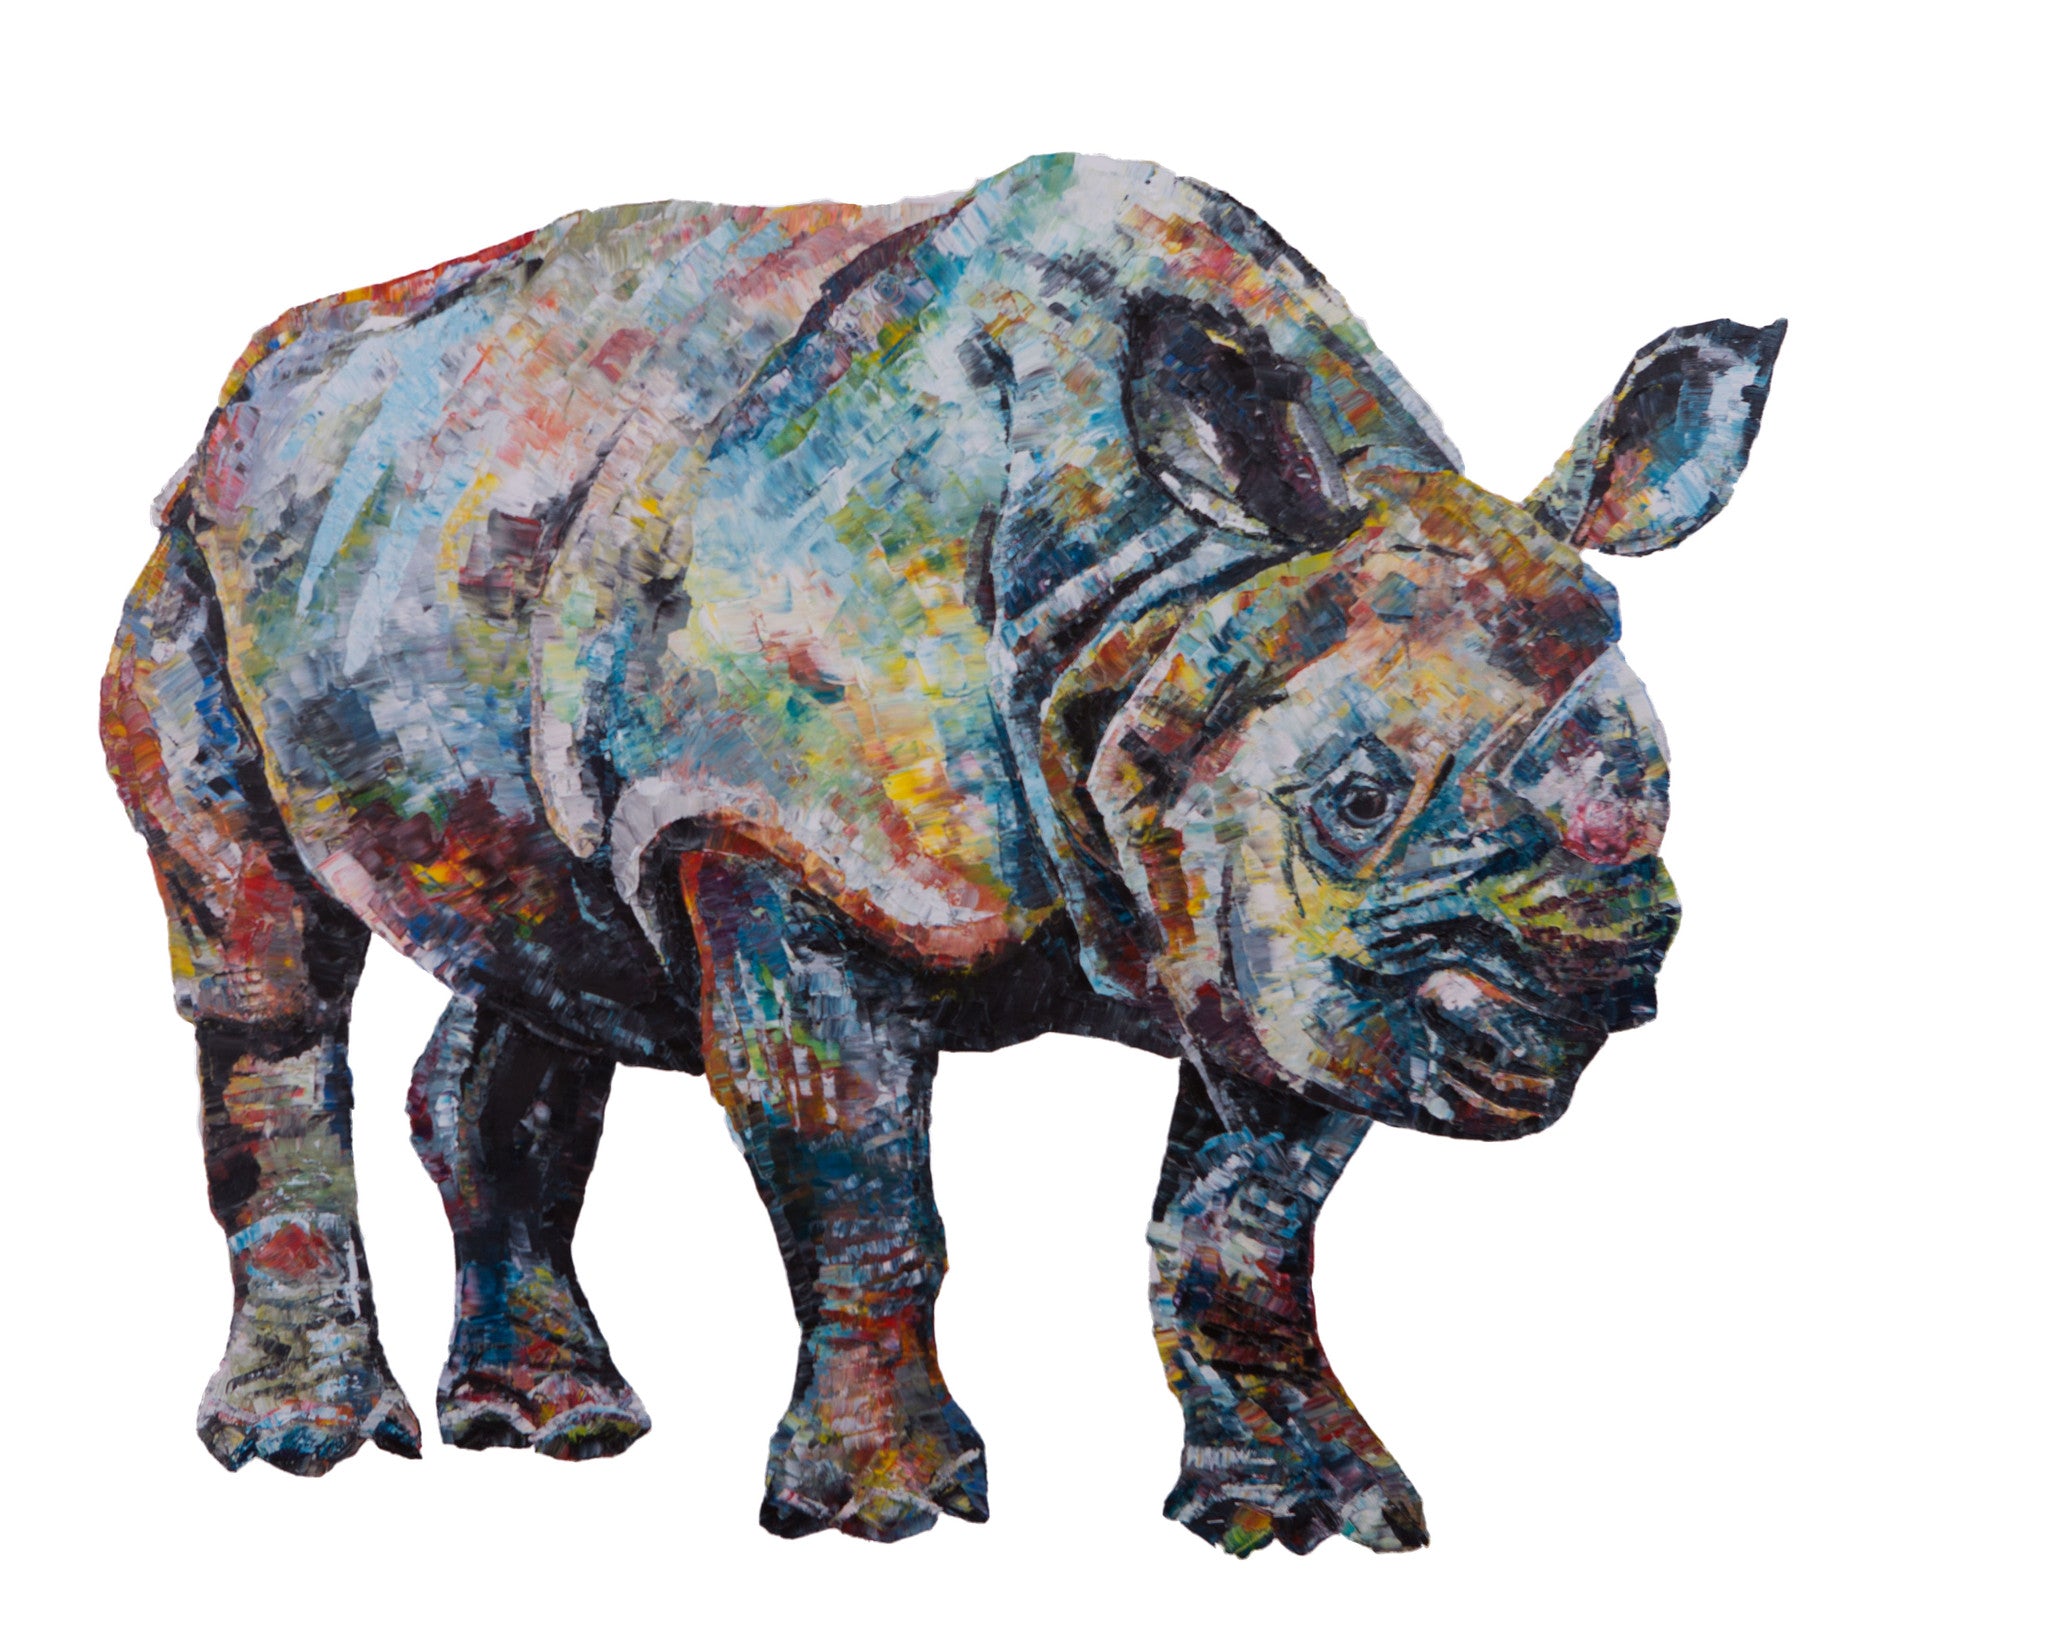 #BECKSYPAINTS4RHINOS PROJECT